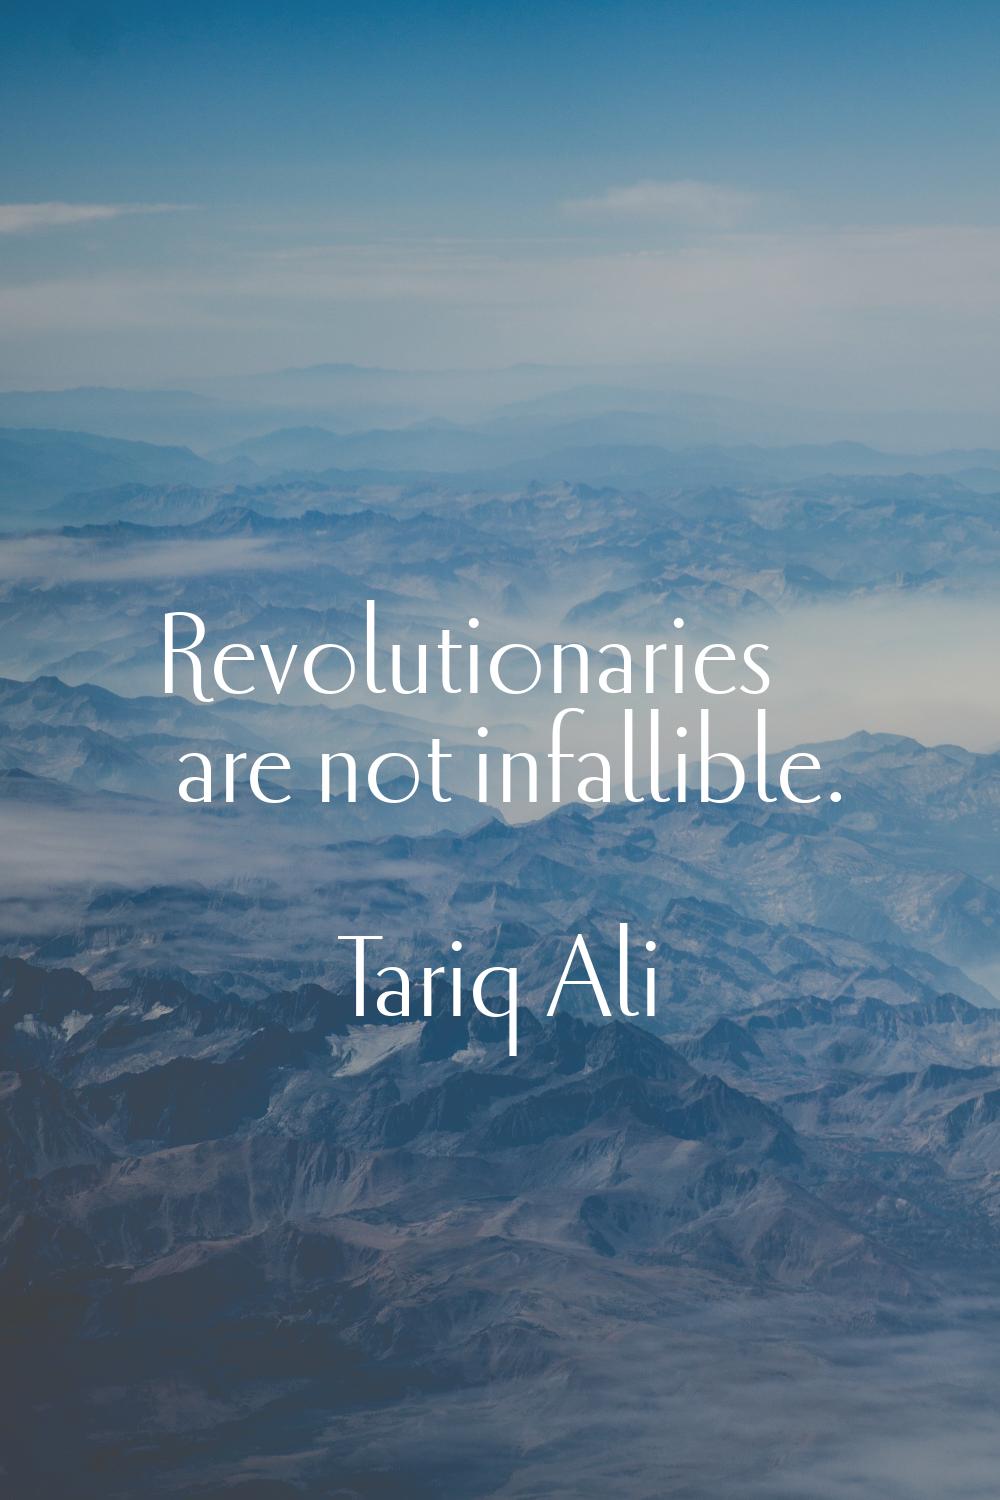 Revolutionaries are not infallible.